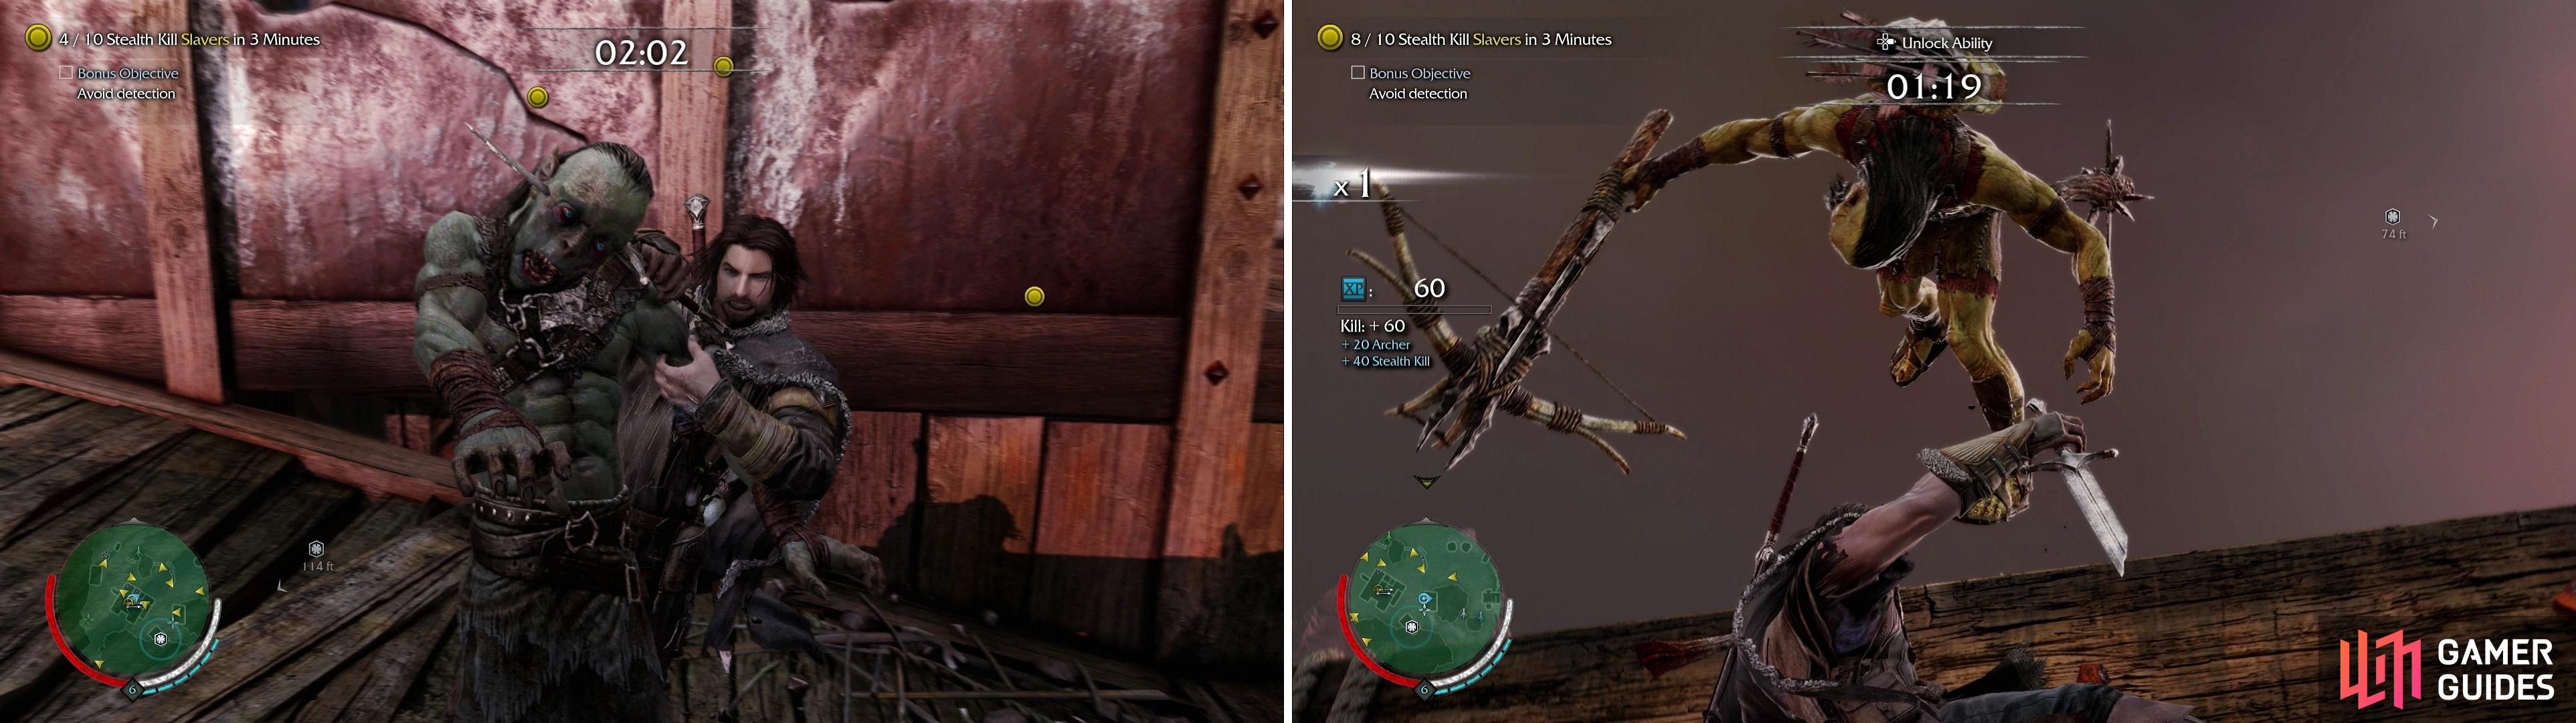 Killing Uruks quickly while remaining undetected is the goal here-normal Stealth Kills work just fine (left), but performing the odd Ledge Kill will make this task even easier (right).